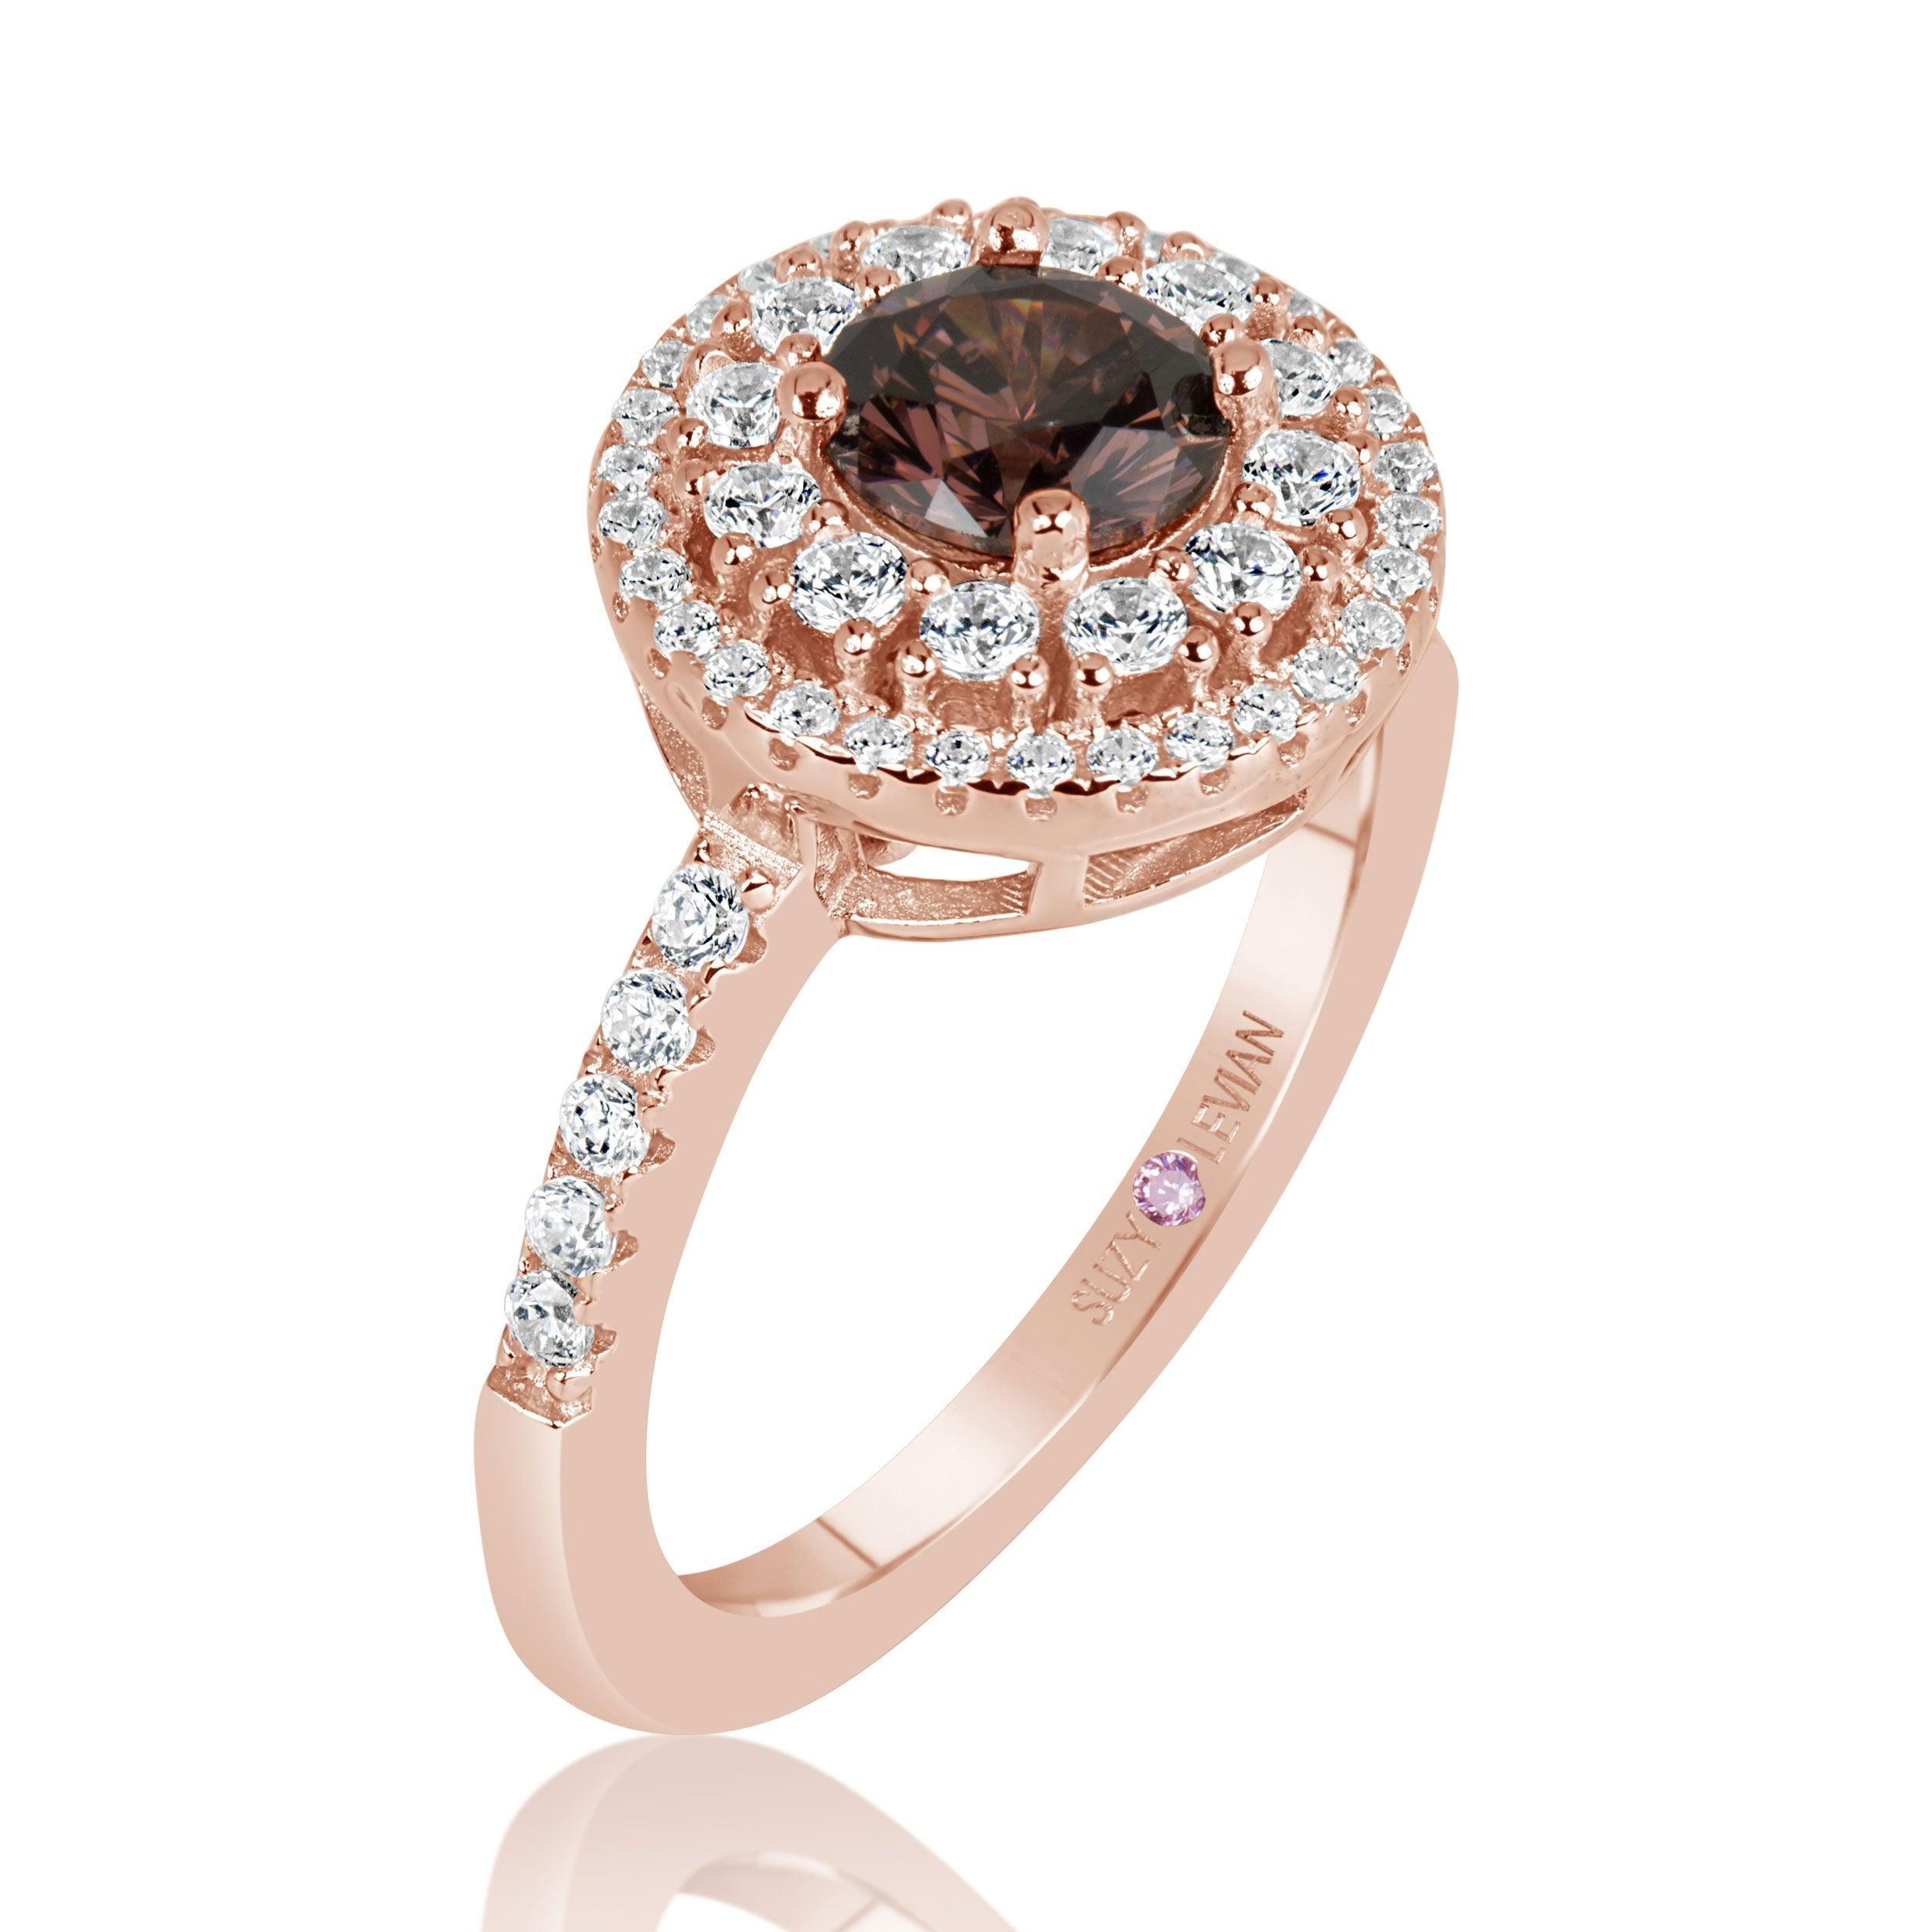 Round Cut White & Brown Cubic Zirconia Solitaire with Accent Ring in 14K White Gold Over Sterling Silver